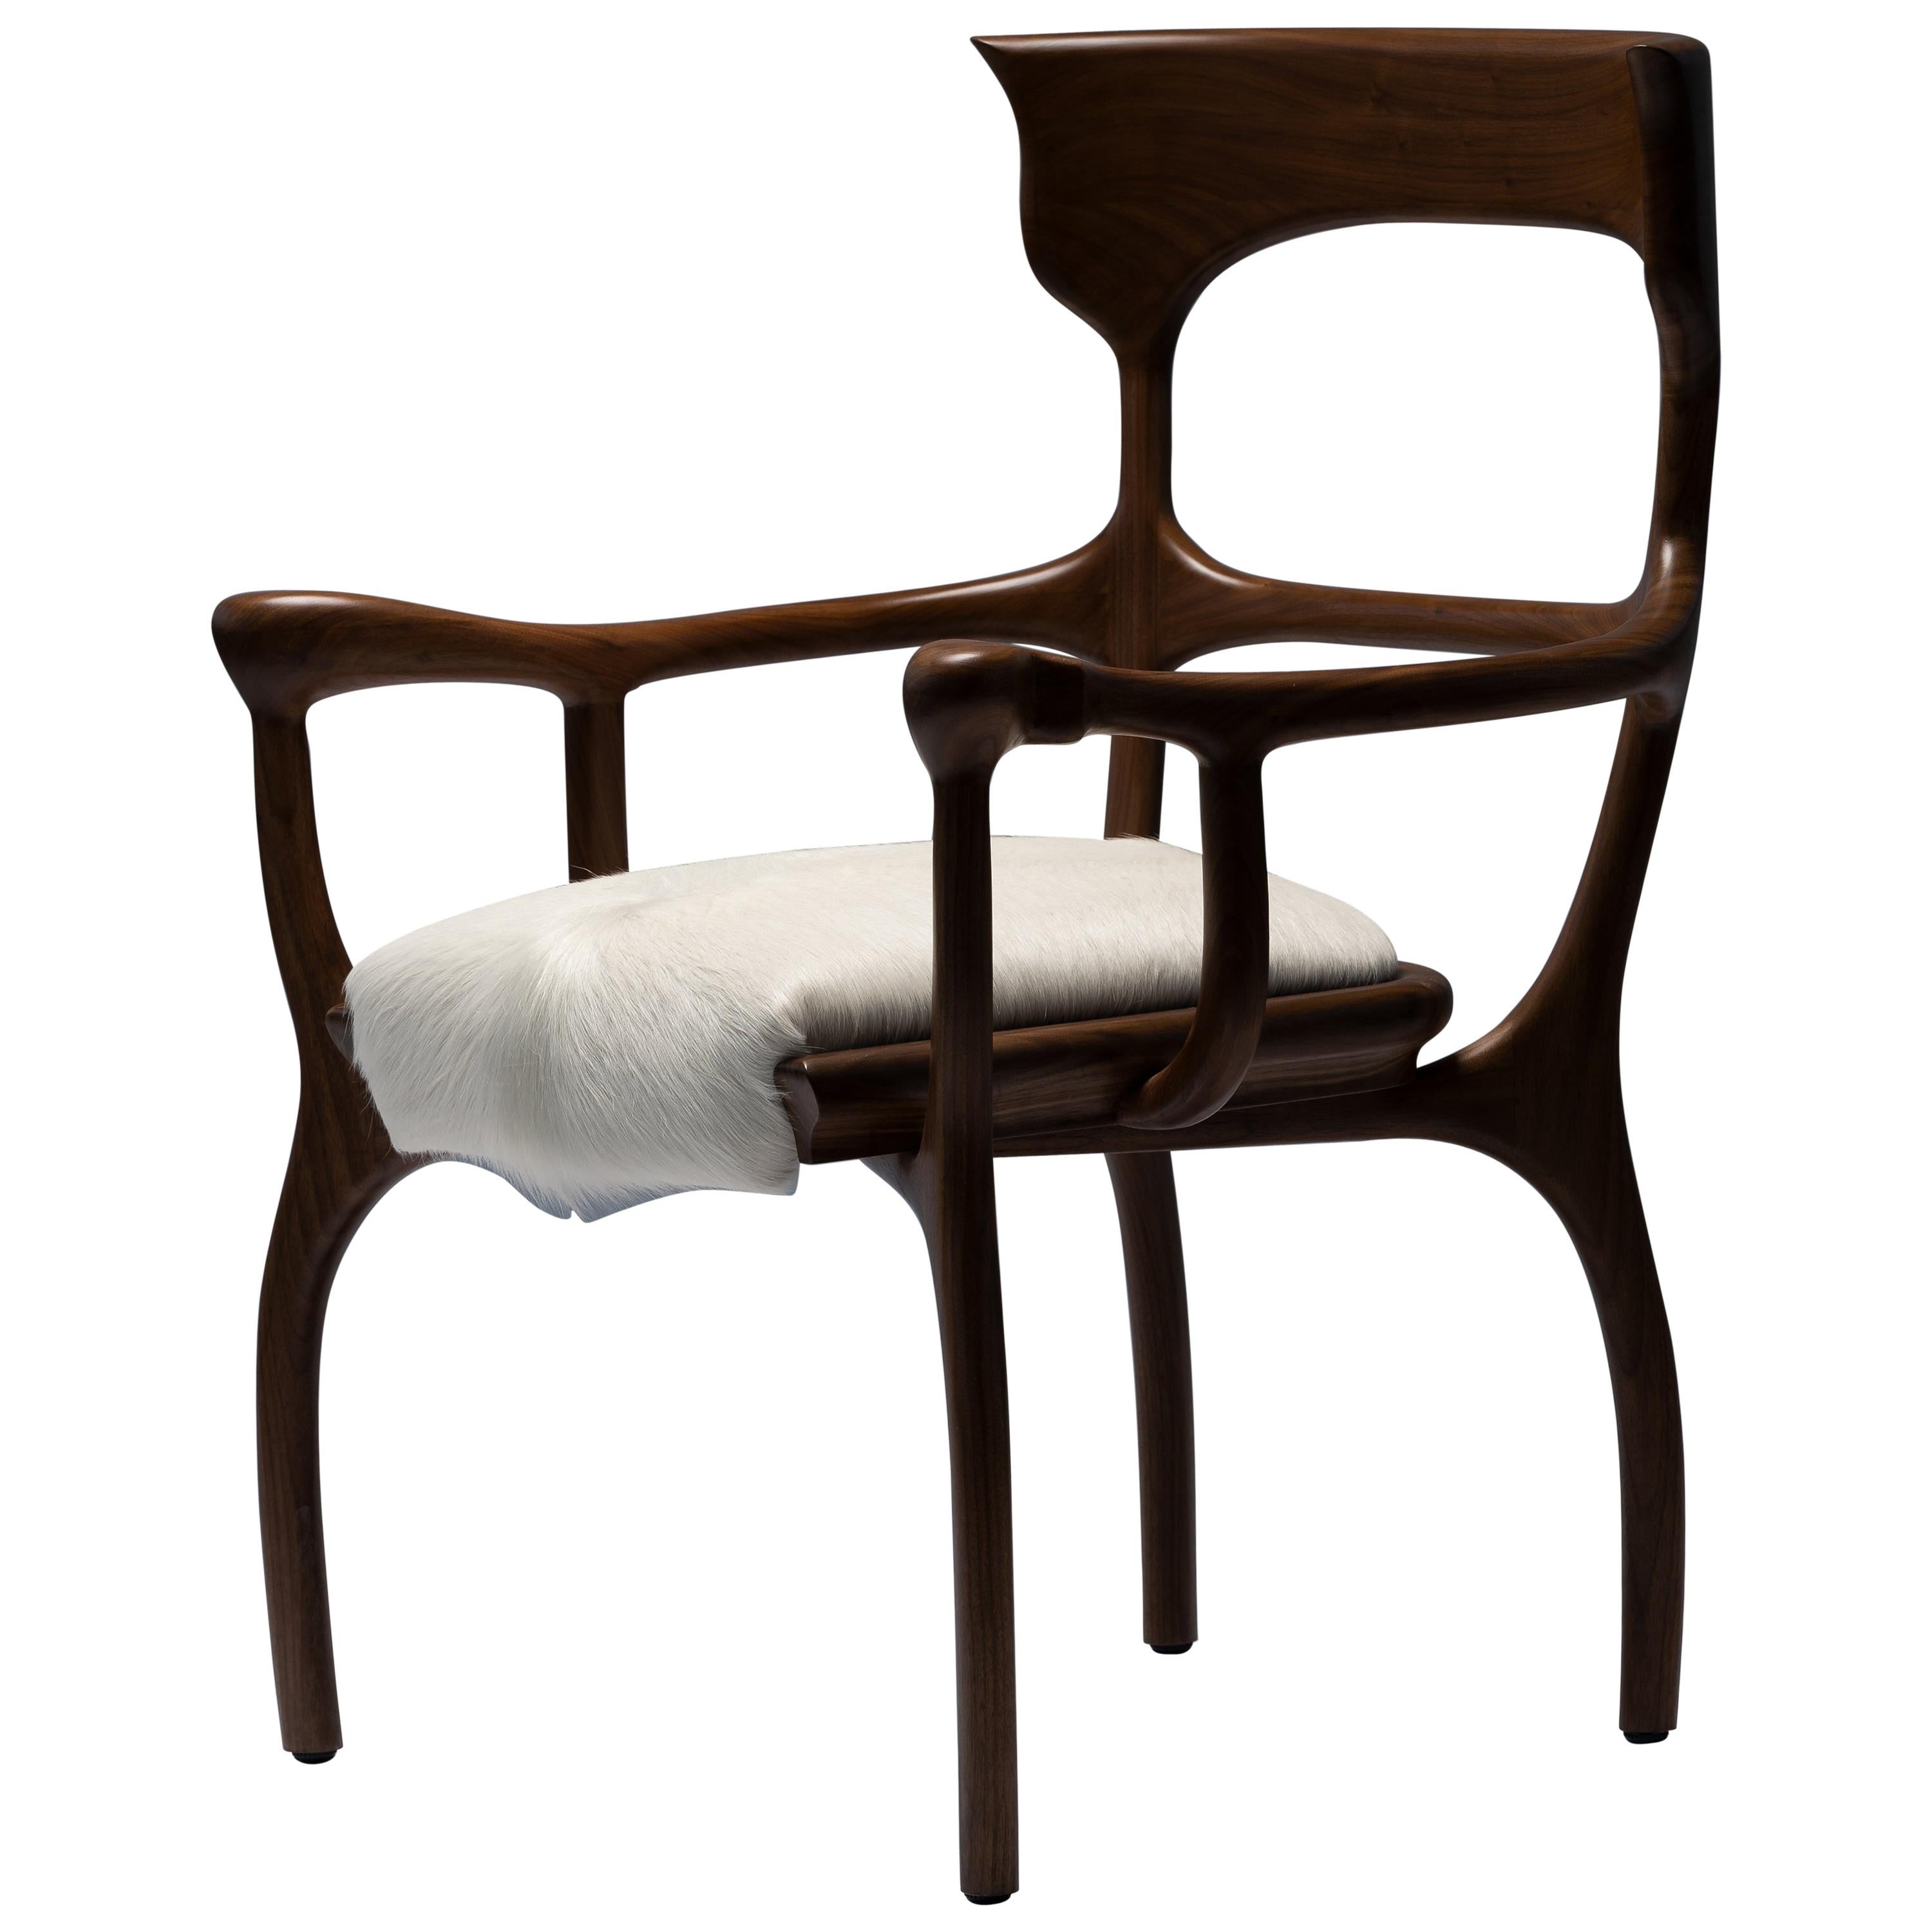 MARTA Brown Chair/Armchair in Walnut/Oak with Cream Cowhide Seat by Mandy Graham For Sale